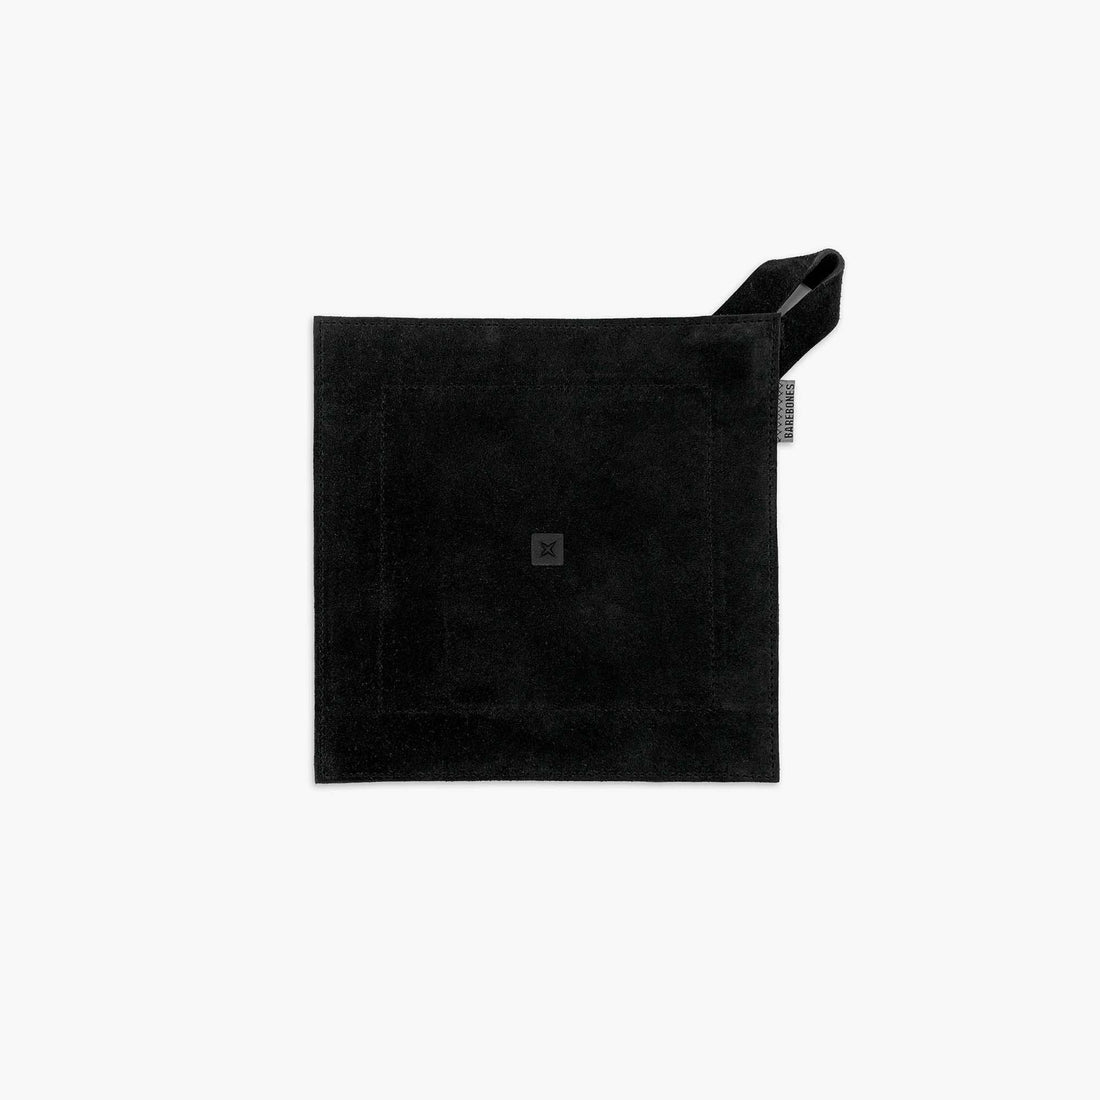 Suede Leather Hot Pad - Black